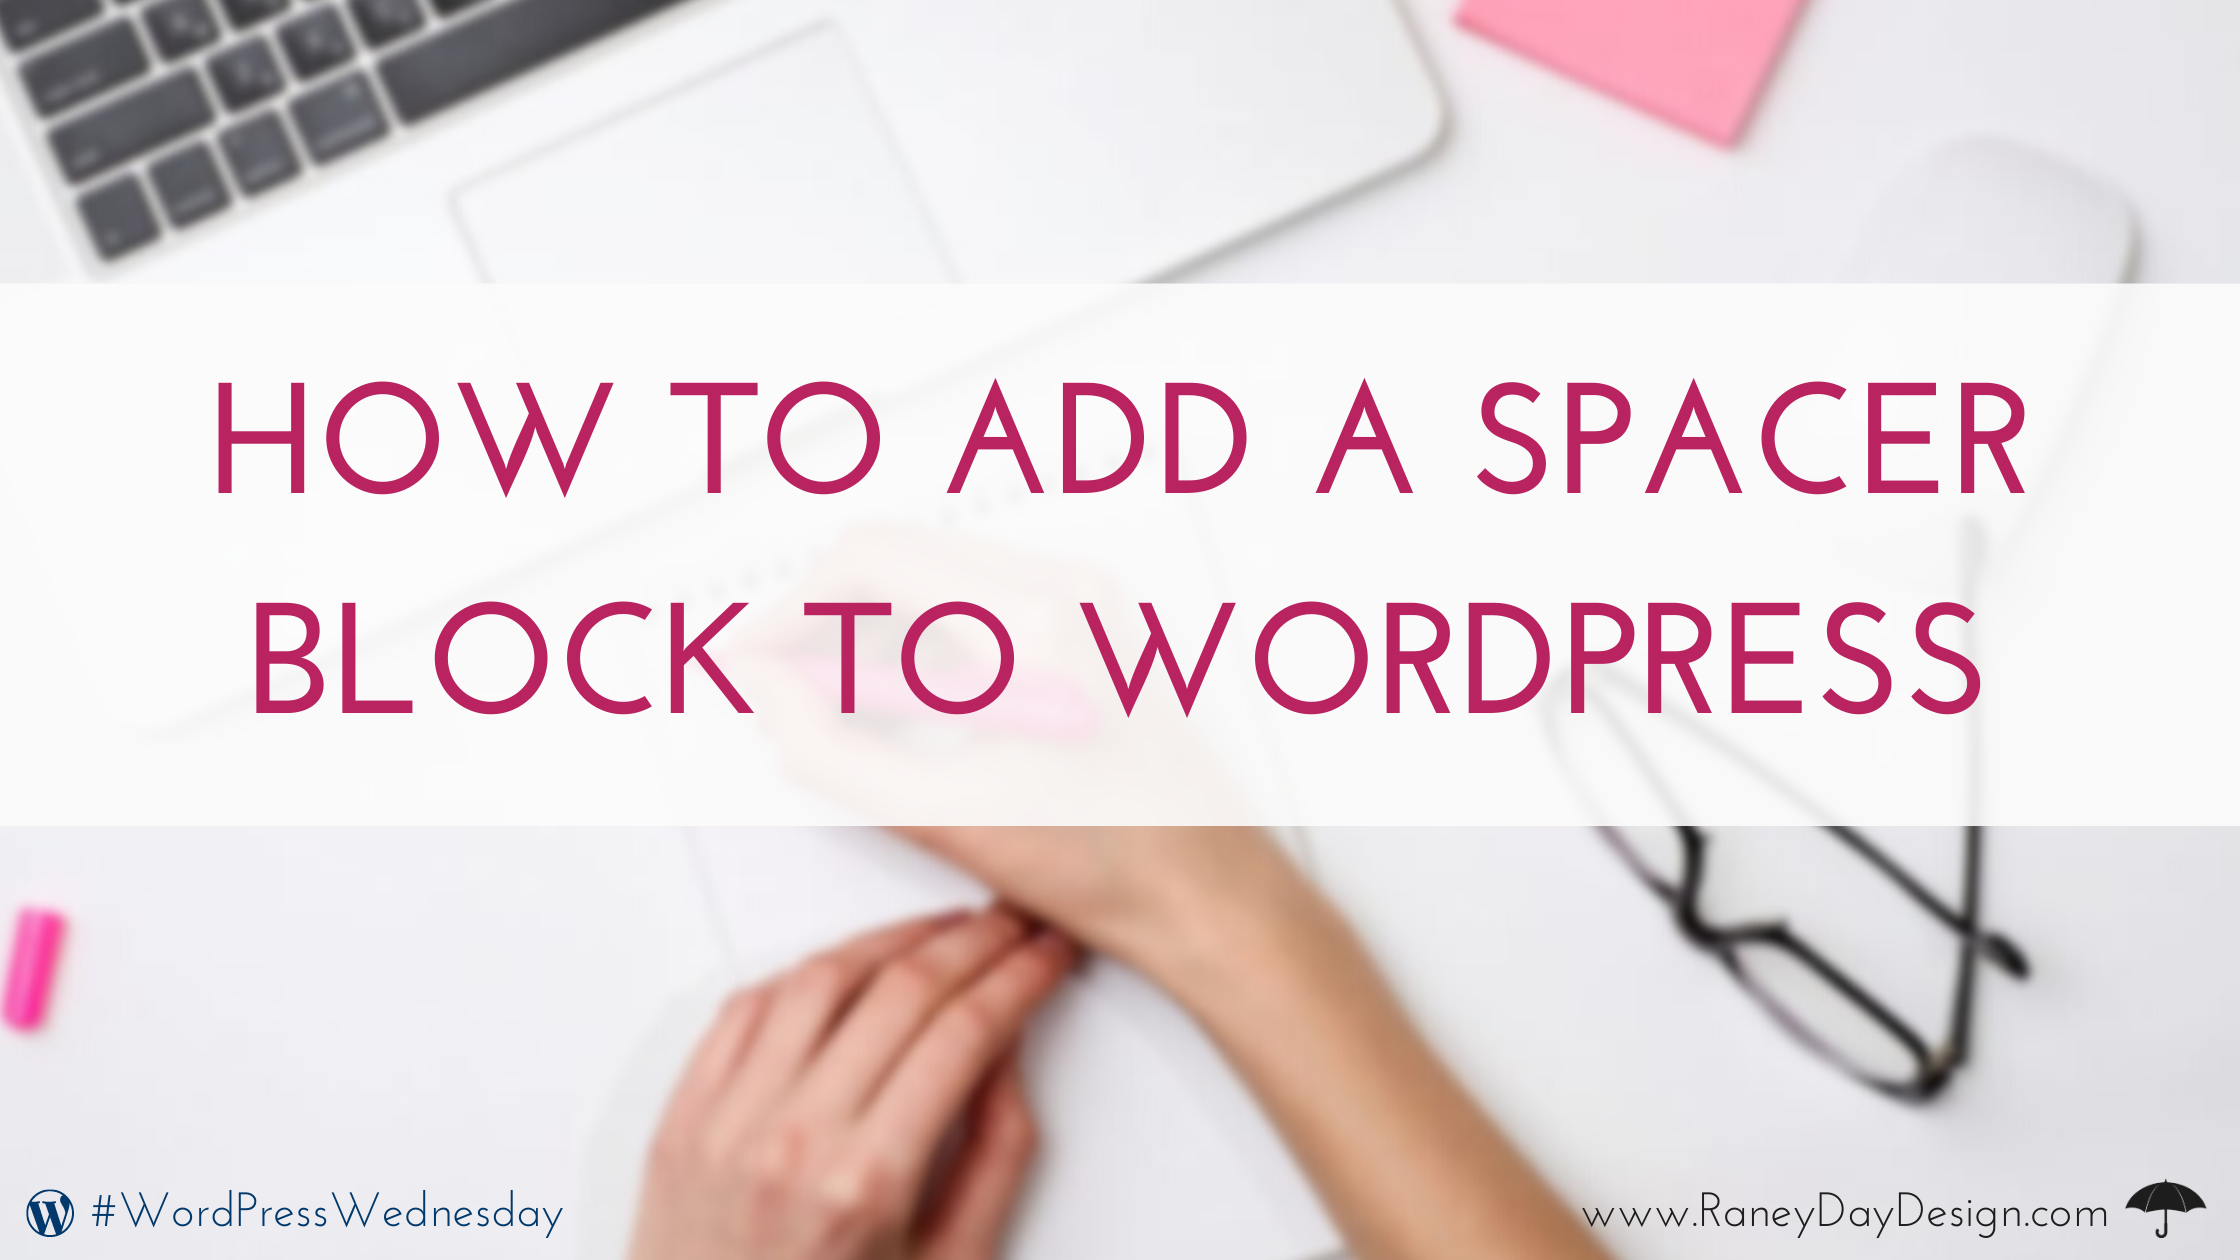 How to Add a Spacer Block to WordPress